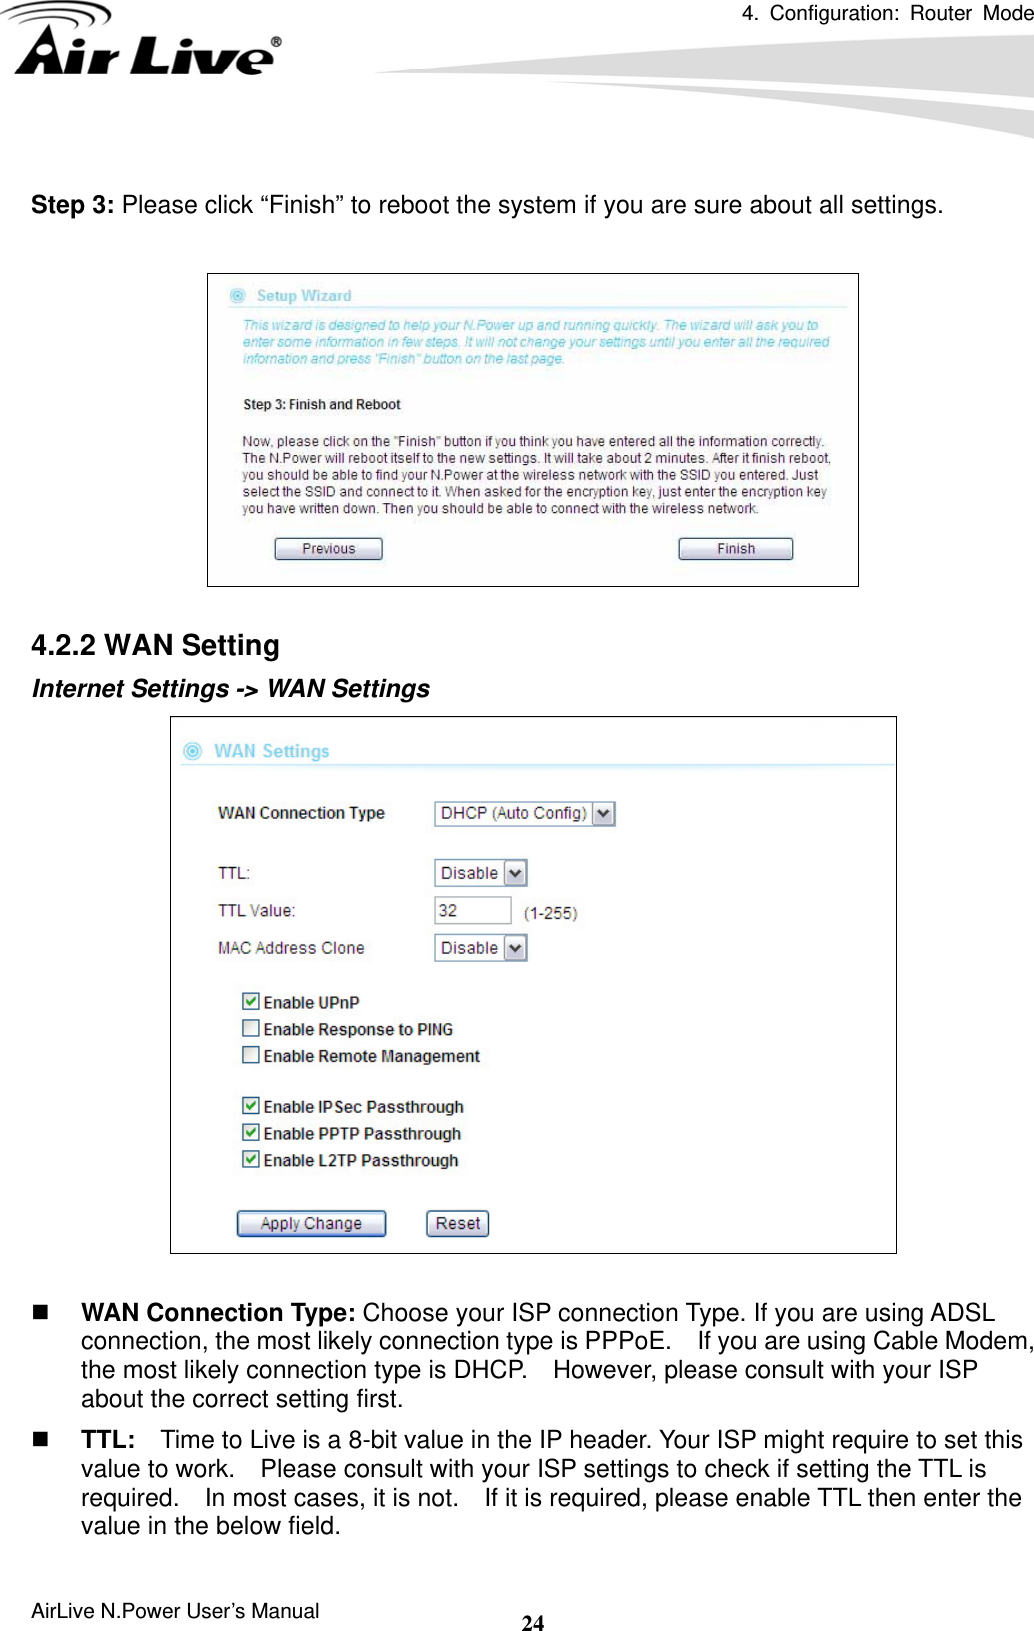 4. Configuration: Router Mode  AirLive N.Power User’s Manual  24 Step 3: Please click “Finish” to reboot the system if you are sure about all settings.    4.2.2 WAN Setting Internet Settings -&gt; WAN Settings      WAN Connection Type: Choose your ISP connection Type. If you are using ADSL connection, the most likely connection type is PPPoE.    If you are using Cable Modem, the most likely connection type is DHCP.    However, please consult with your ISP about the correct setting first.    TTL:  Time to Live is a 8-bit value in the IP header. Your ISP might require to set this value to work.    Please consult with your ISP settings to check if setting the TTL is required.    In most cases, it is not.    If it is required, please enable TTL then enter the value in the below field. 